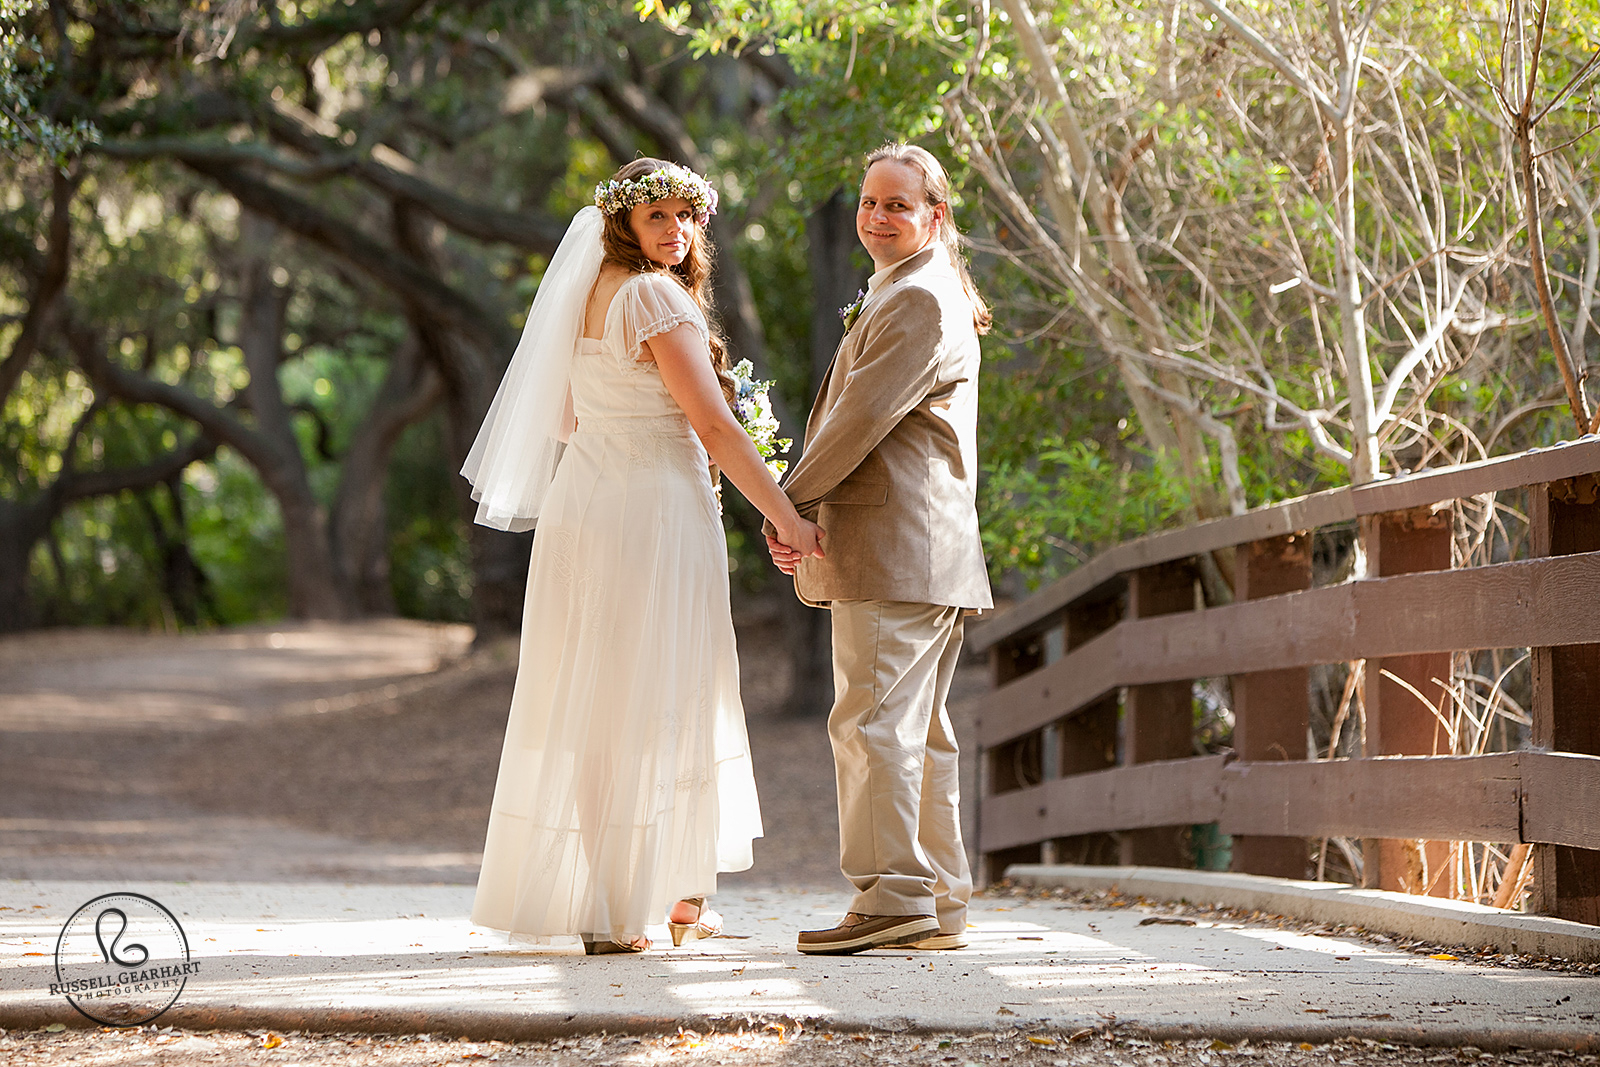 Sunny Afternoon Orange County Park Wedding – Russell Gearhart Photography – www.gearhartphoto.com  